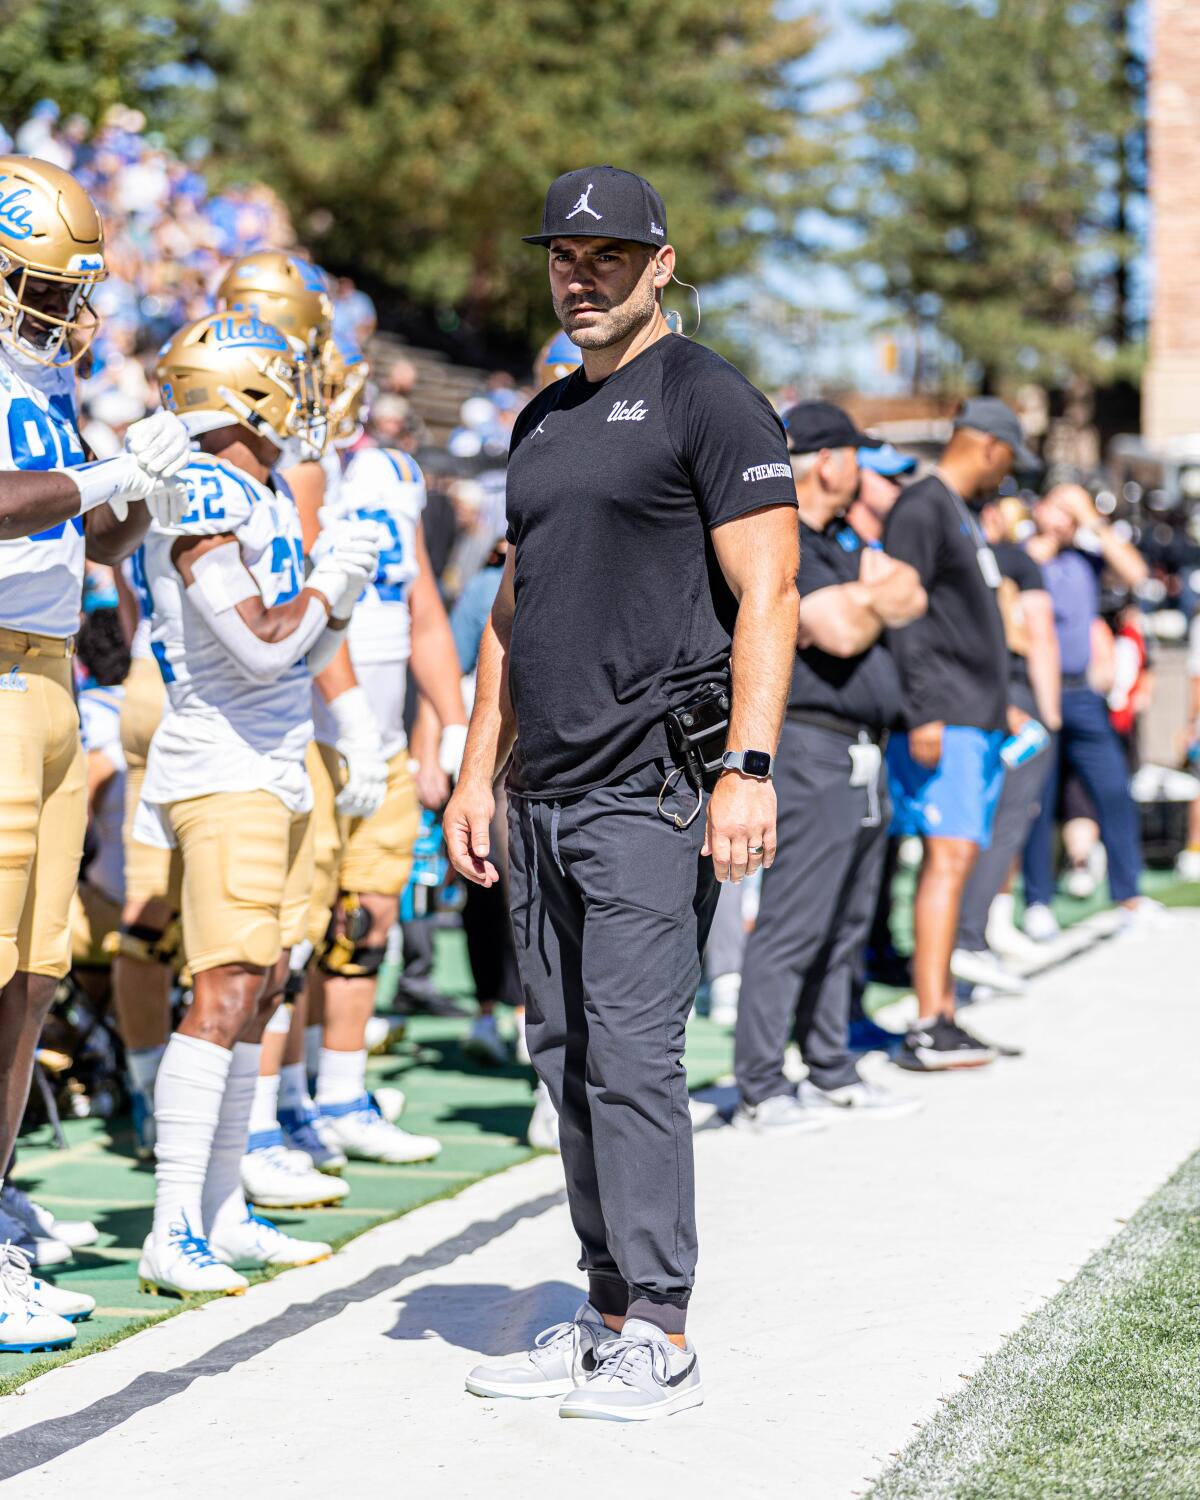 Bryce McDonald, the chief of staff for UCLA football, stands on the sideline.